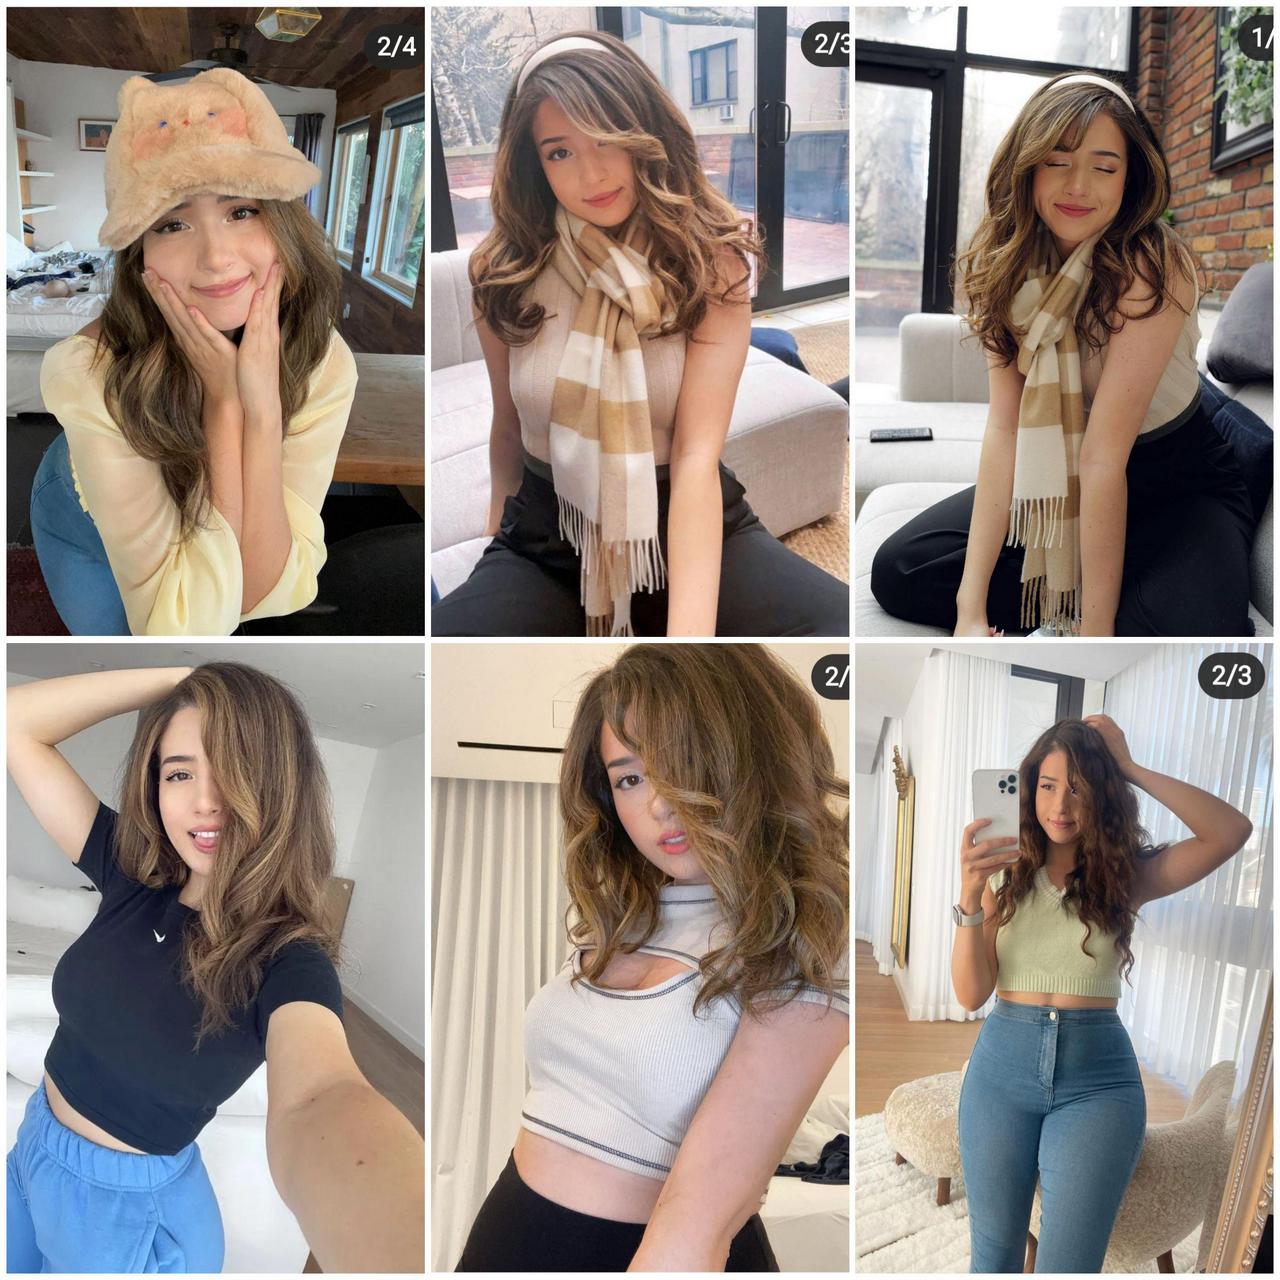 The Amount Of Times Ive Cum For Pokimane NSFW